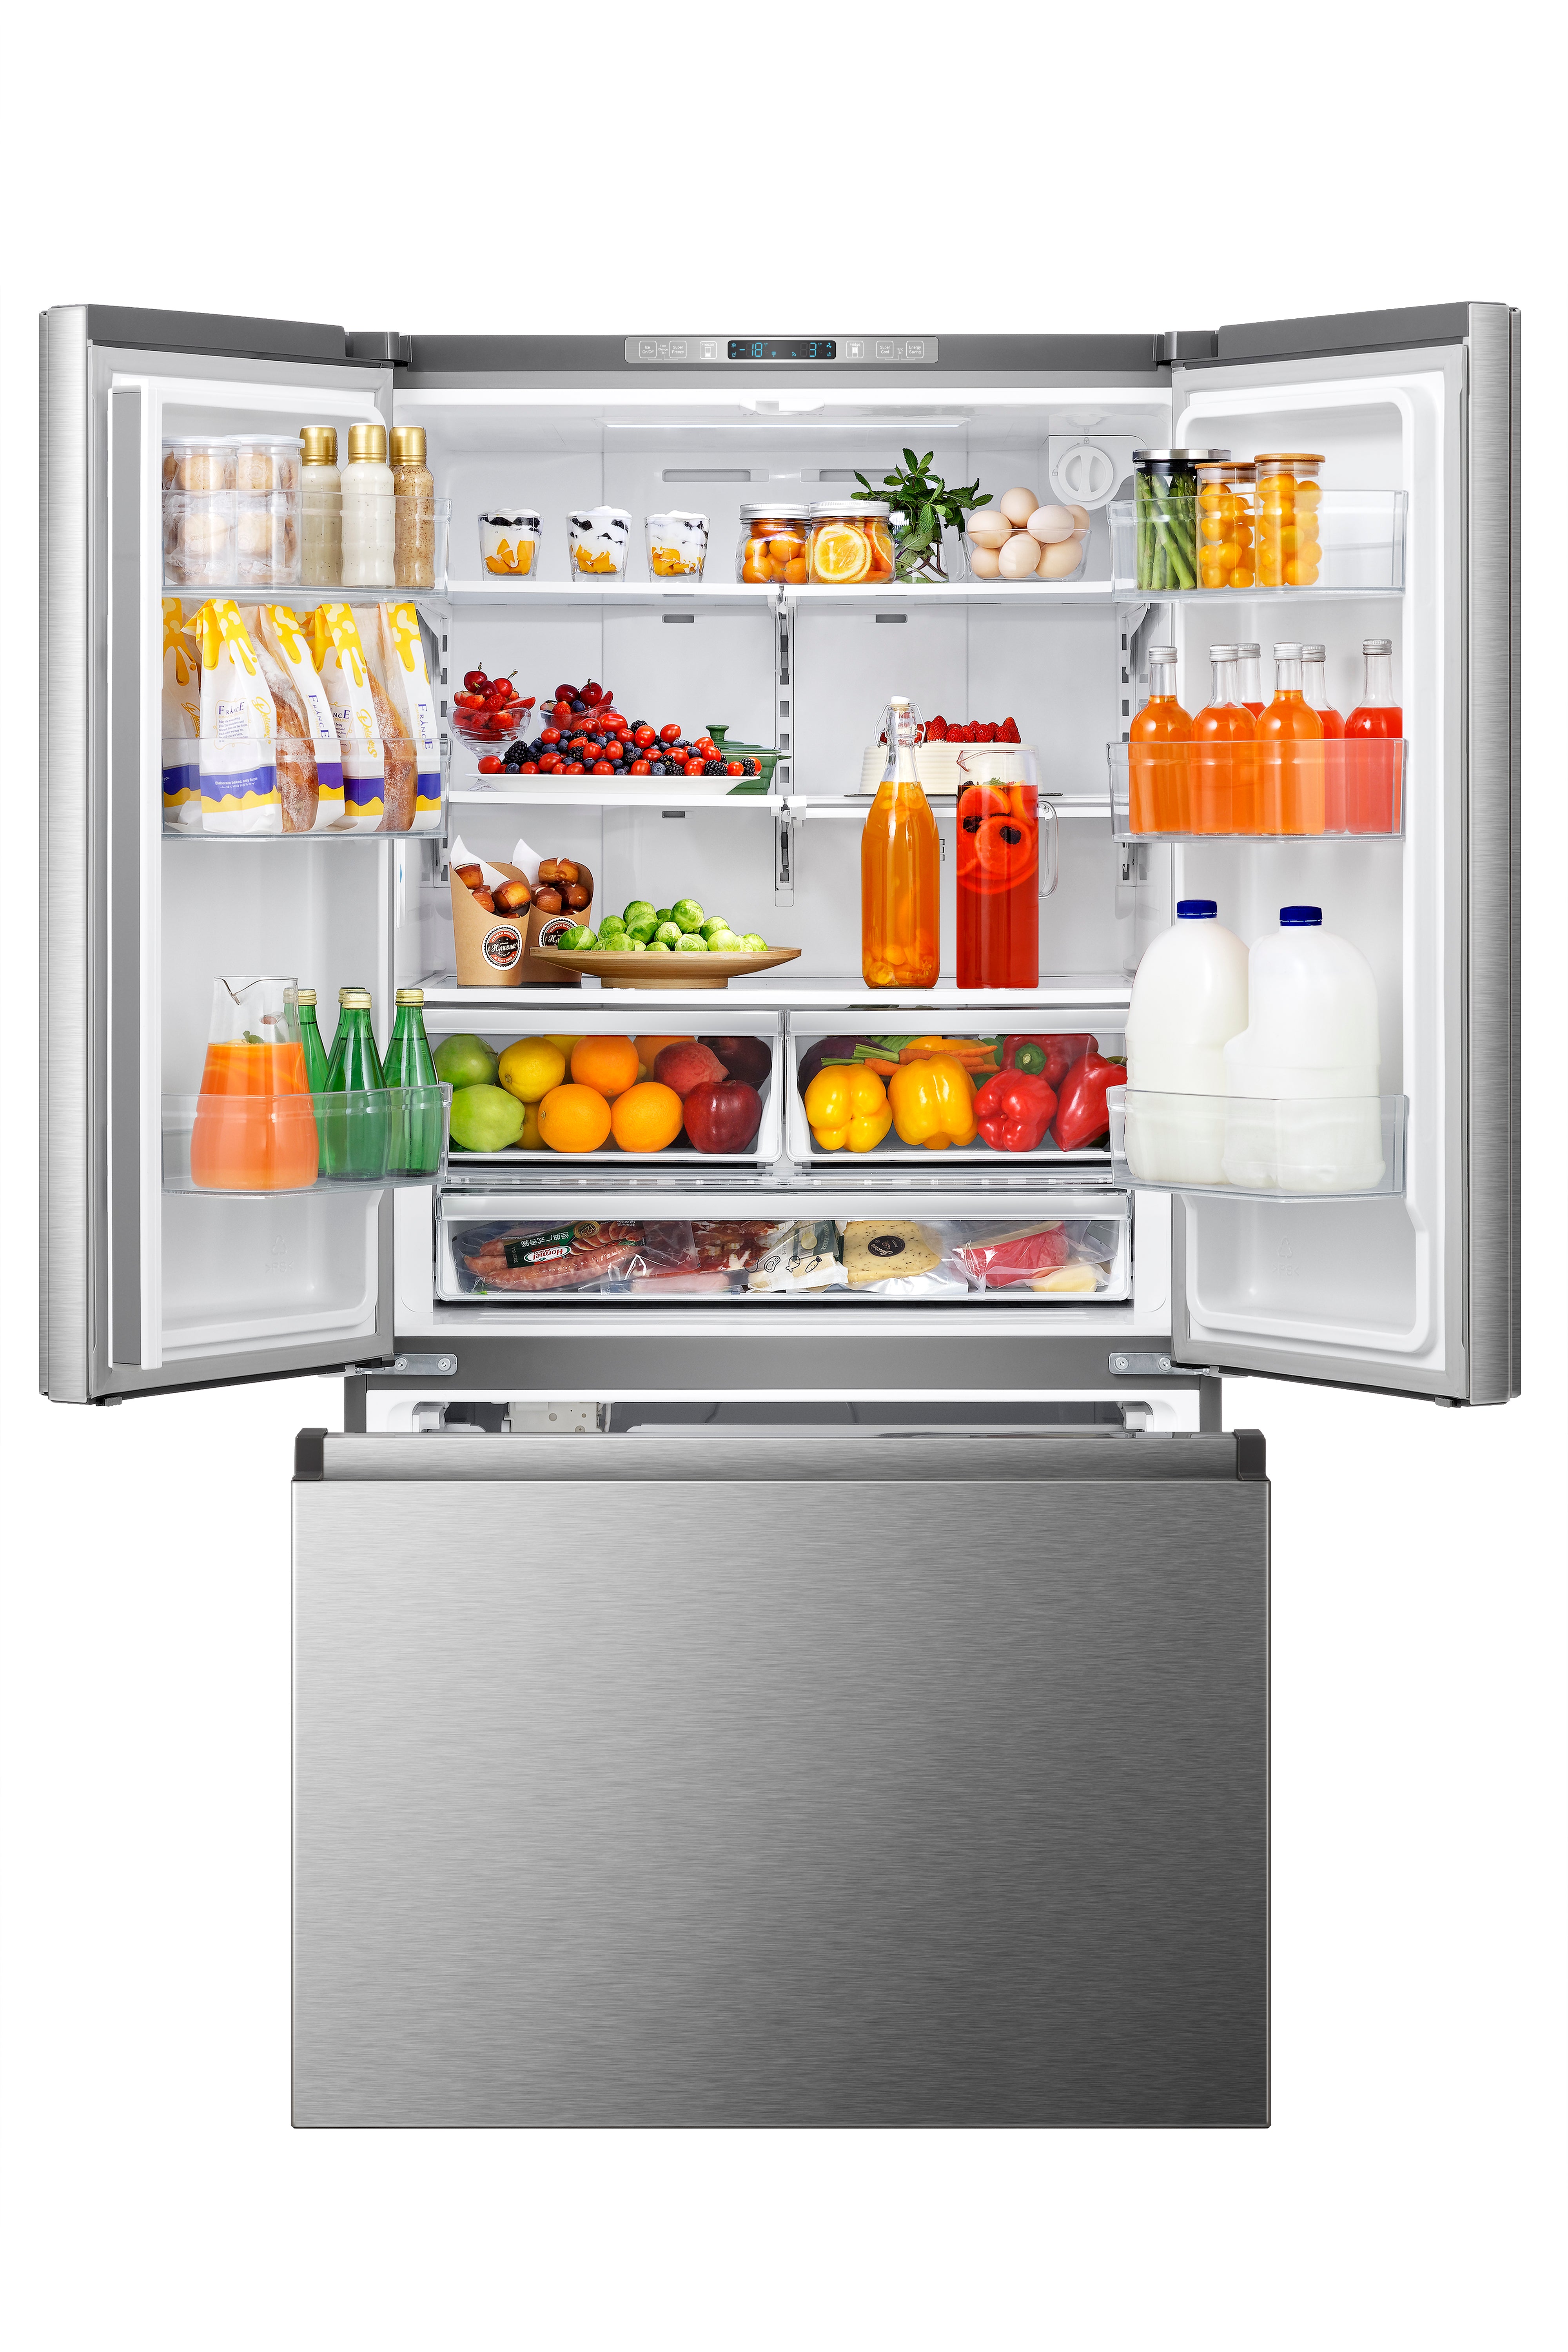 Hisense - 35.98 Inch 18.8 cu. ft French Door Refrigerator in Stainless - RF266C3FSE